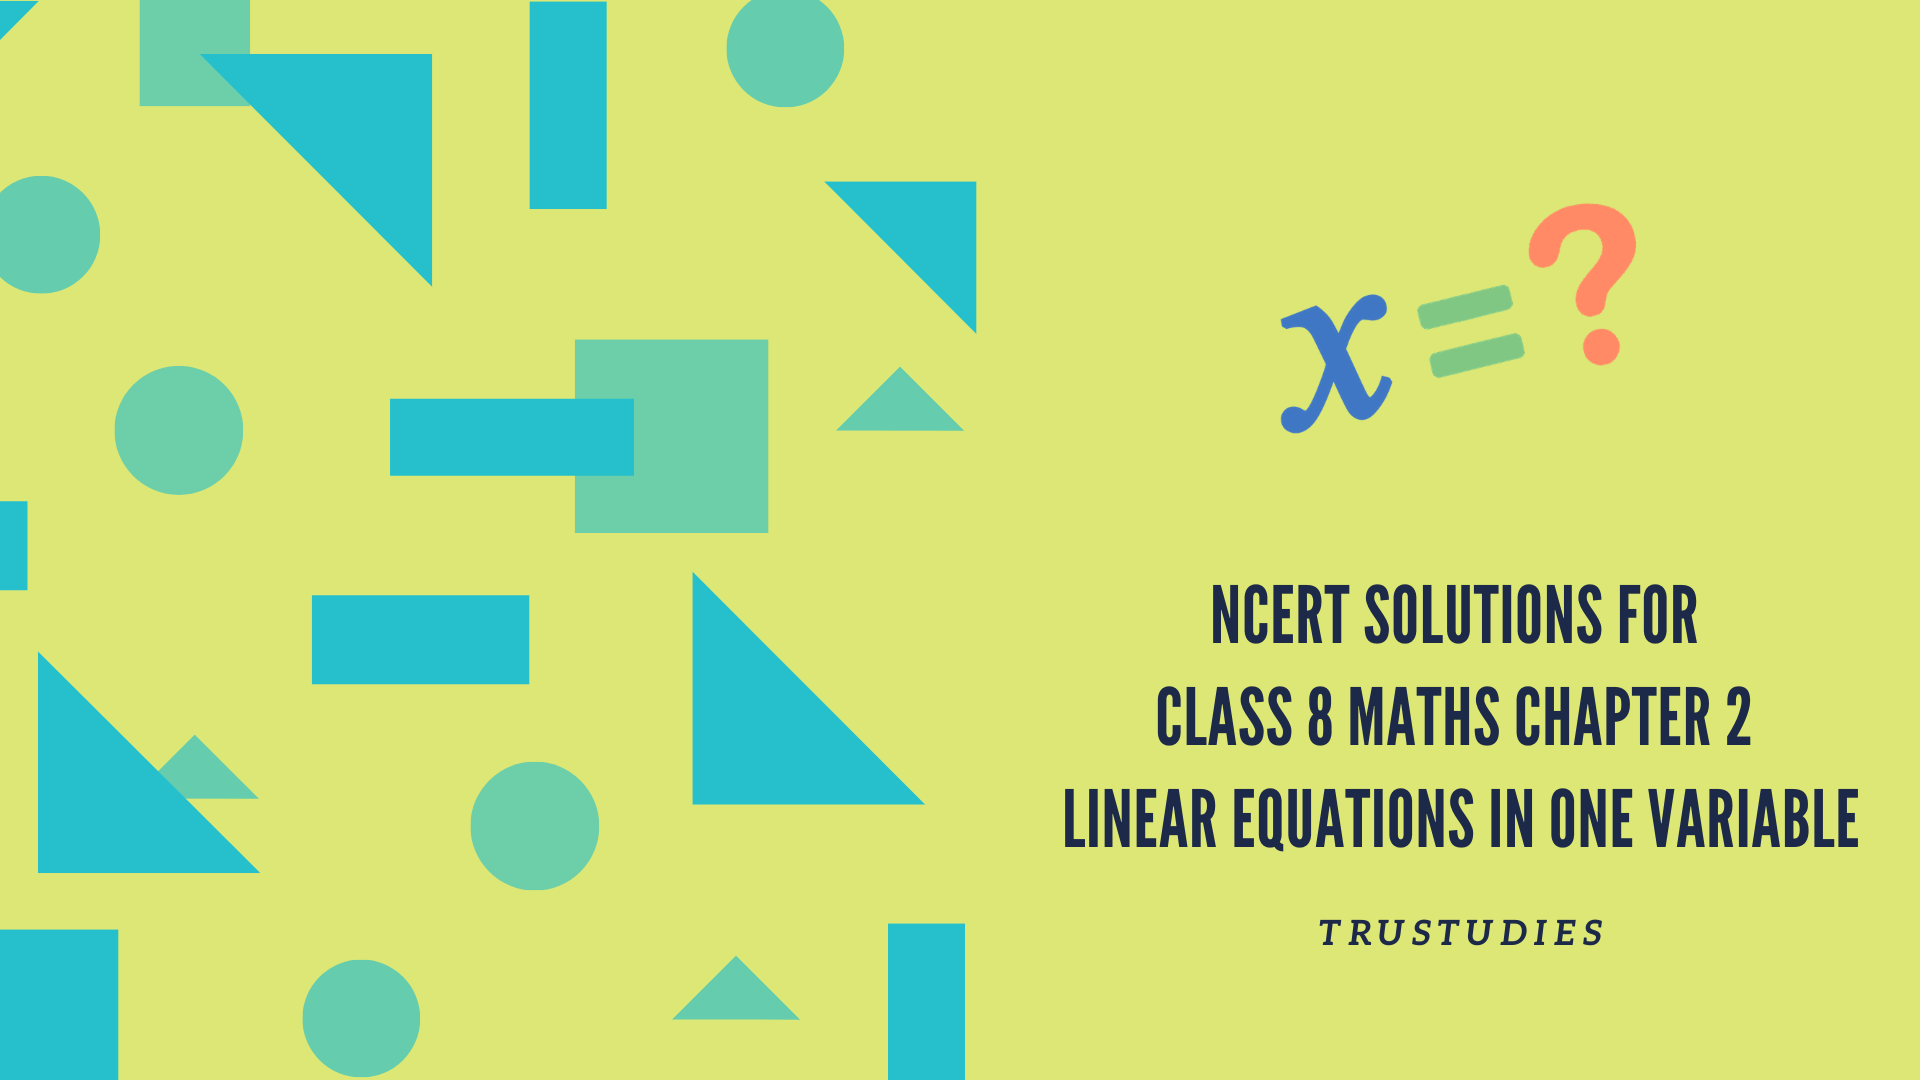 NCERT solutions for class 8 maths chapter 2 linear equations in one variable banner image